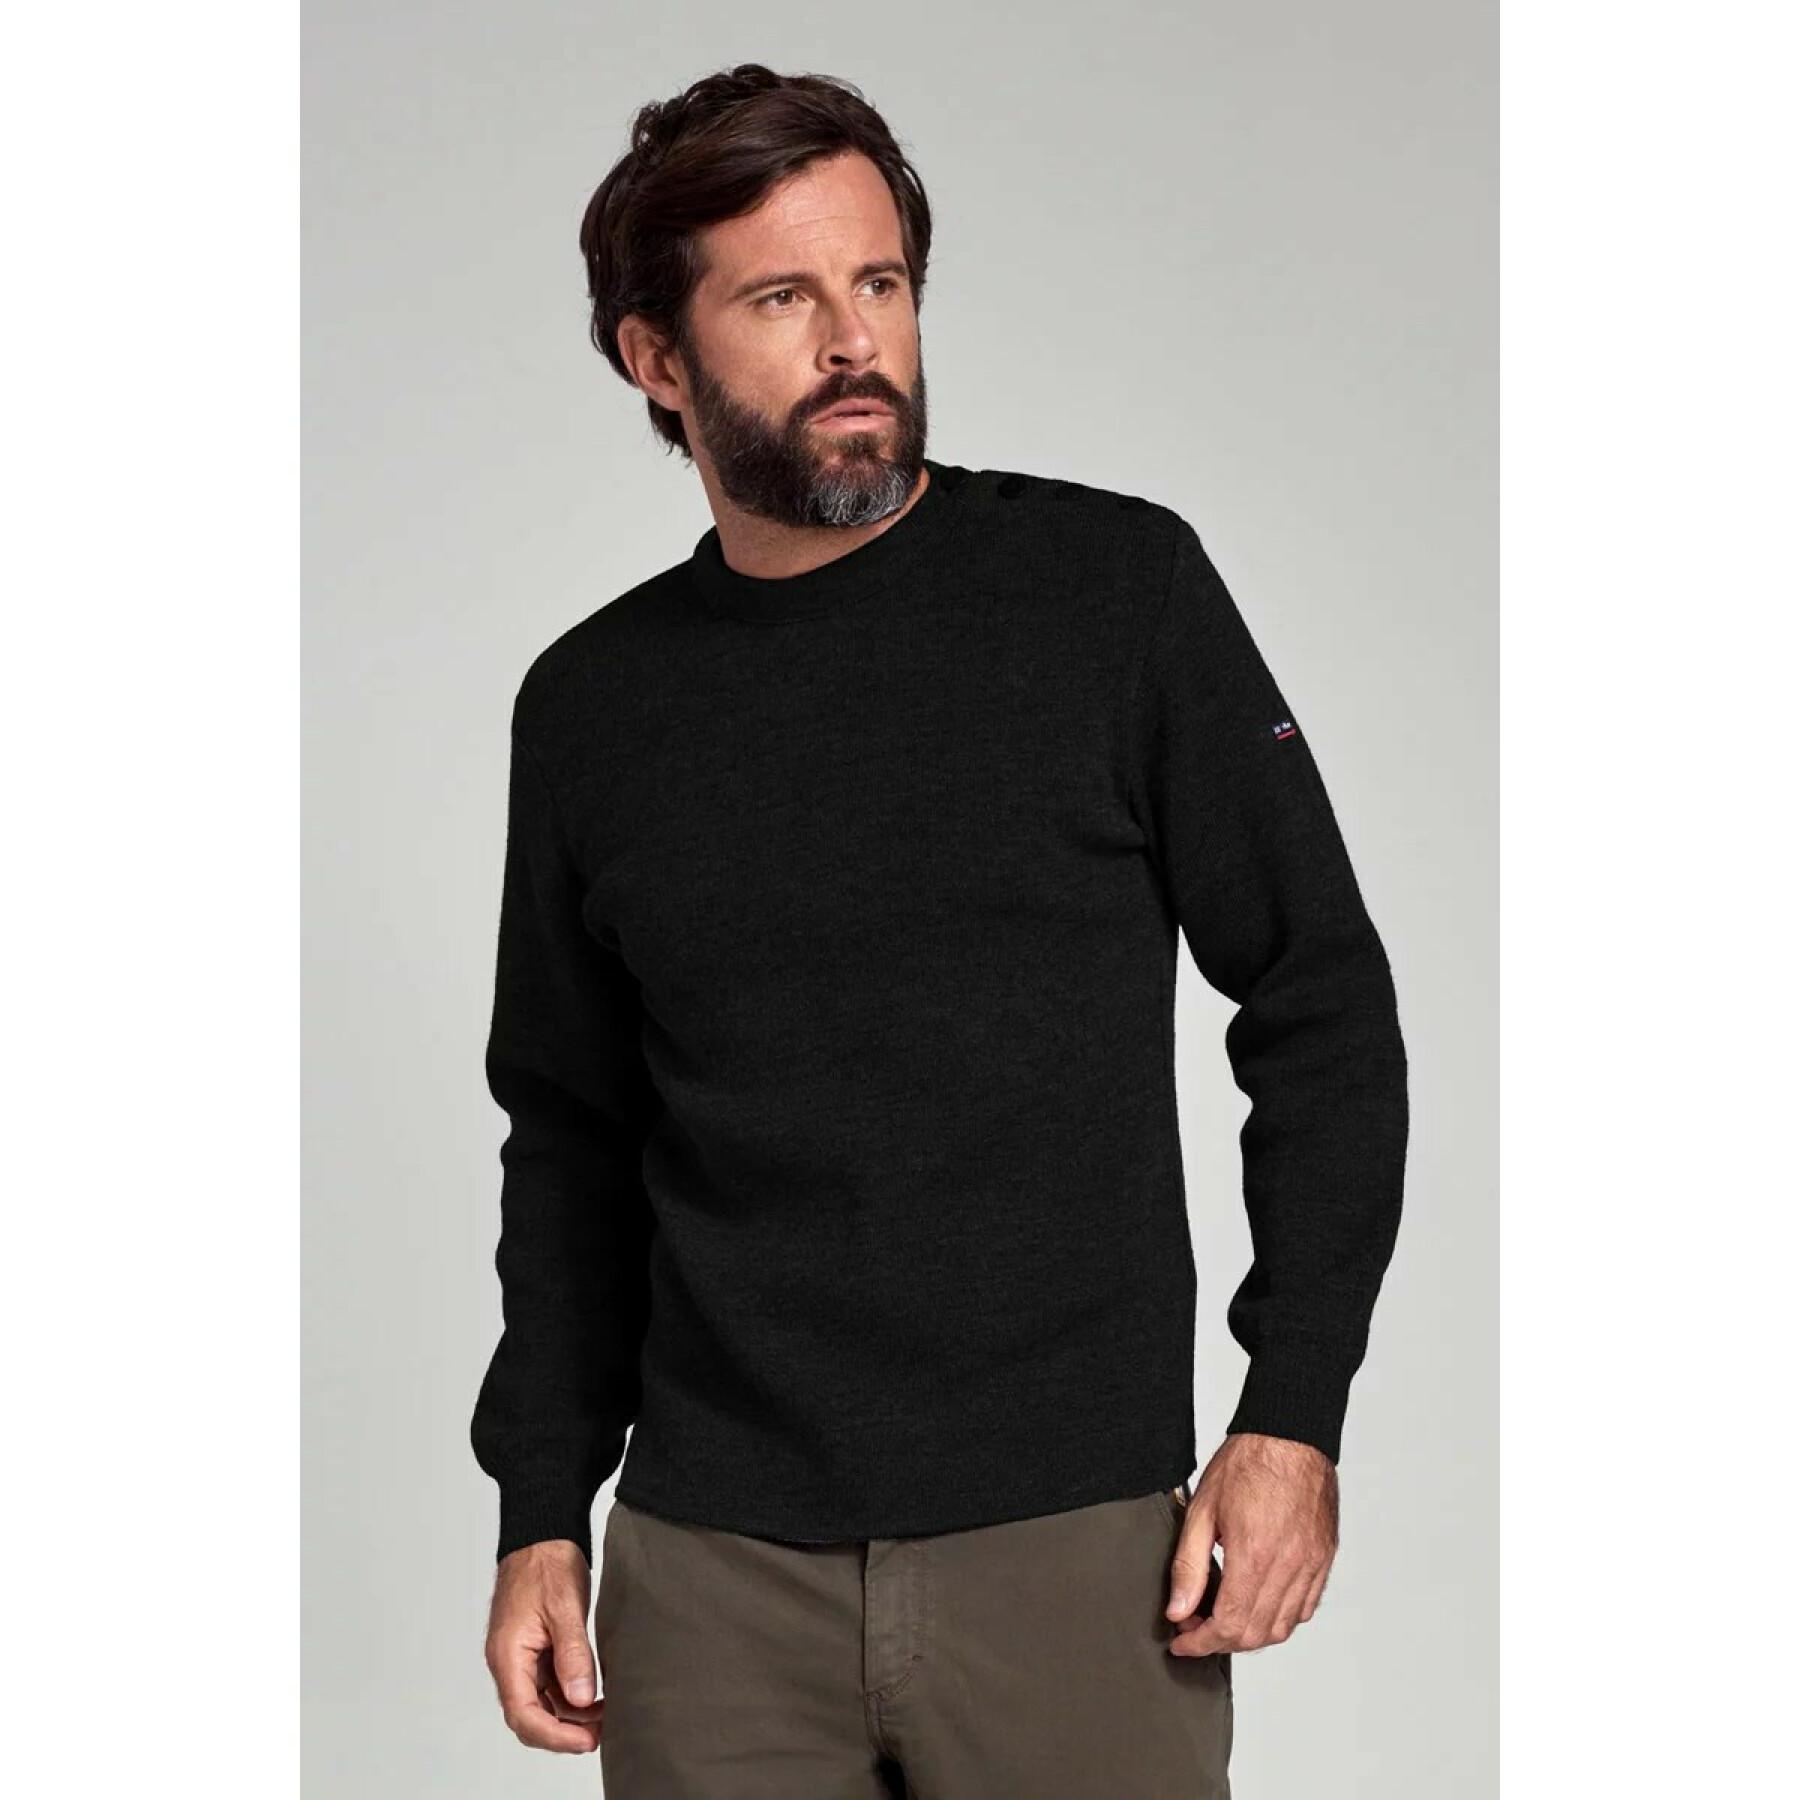 Marinepullover Armor-Lux fouesnant